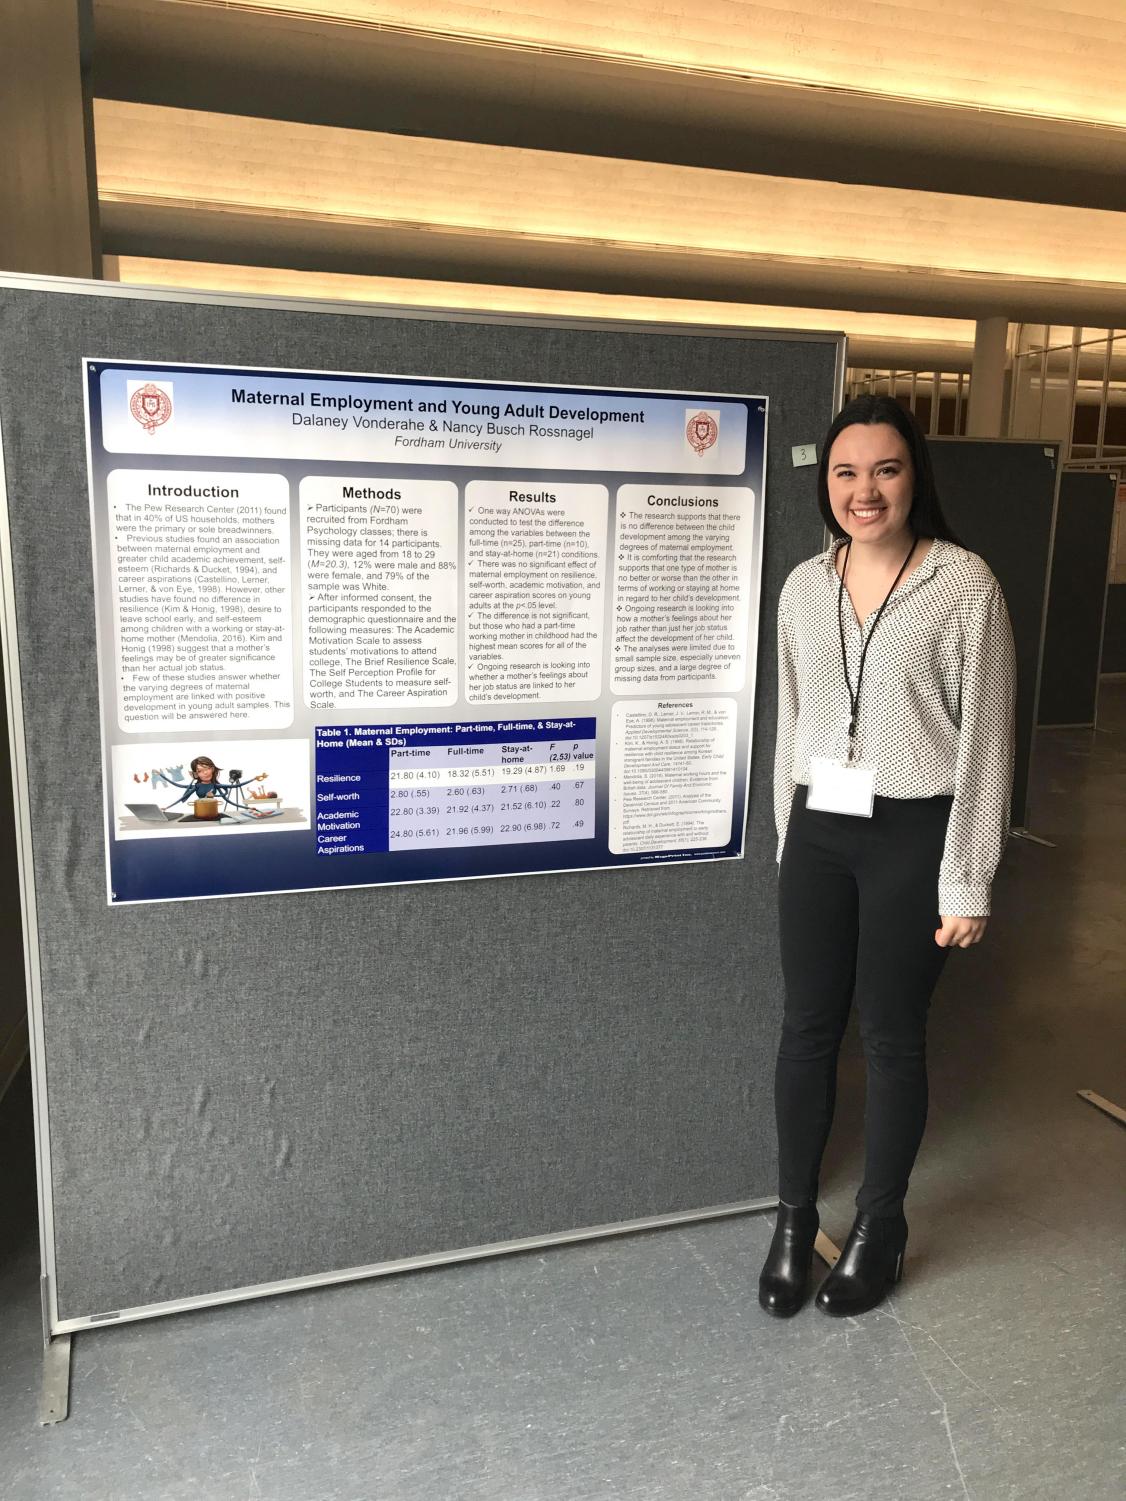 Dalaney Vonderahe presented her research project about the effects of working versus stay-at-home mothers on child development. (Courtesy of Dalaney Vonderahe)